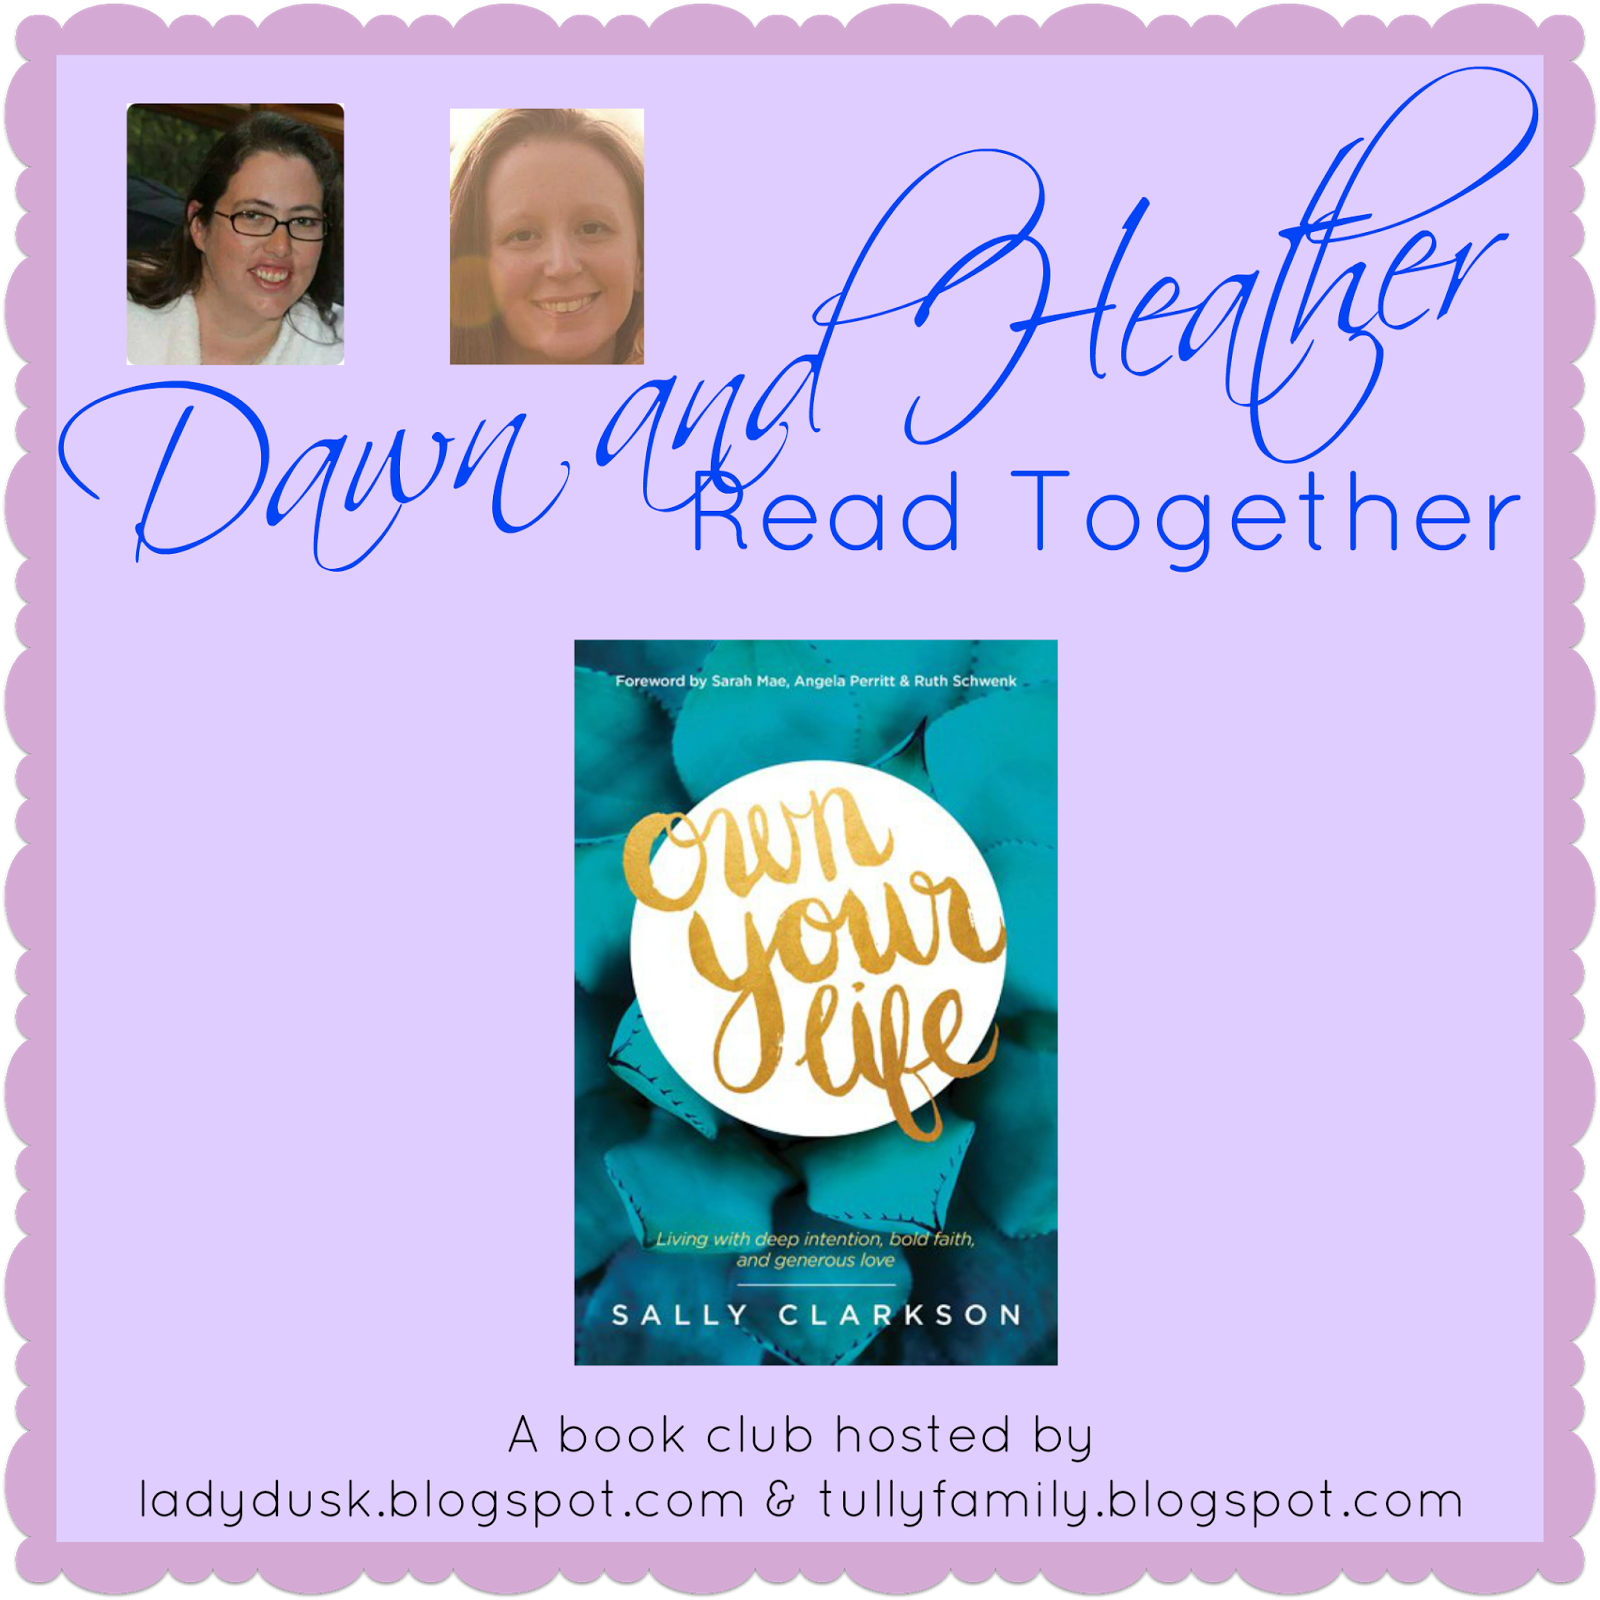 Dawn and Heather Read Together: Own Your Life – Introduction